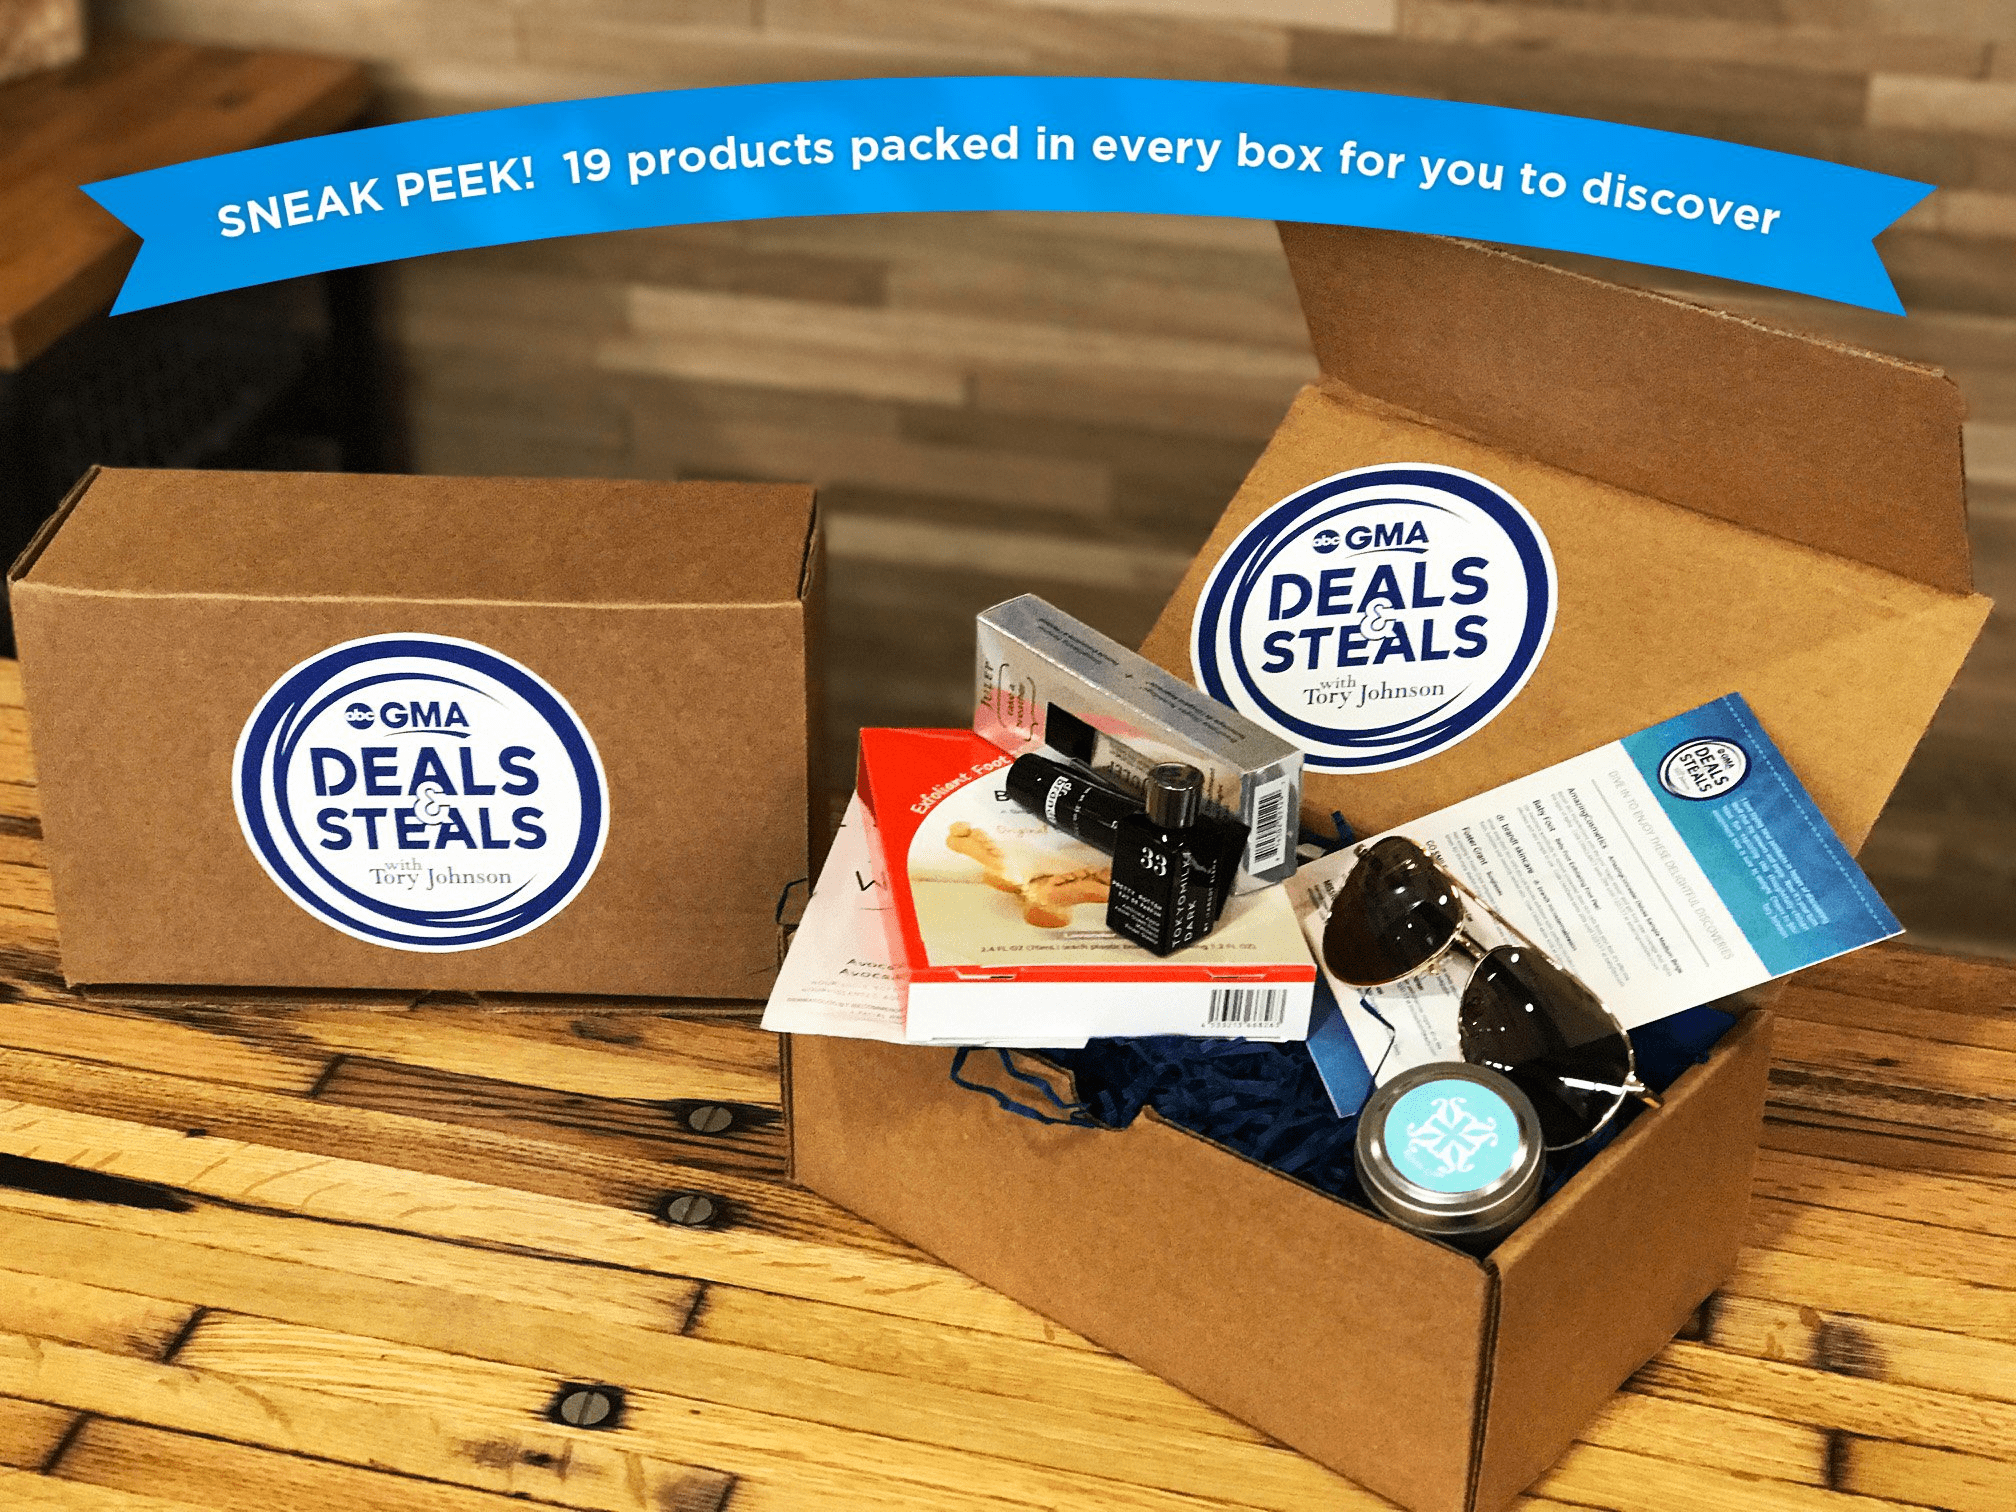 GMA Deals & Steals Discover The Deal Box + Spoilers! Hello Subscription